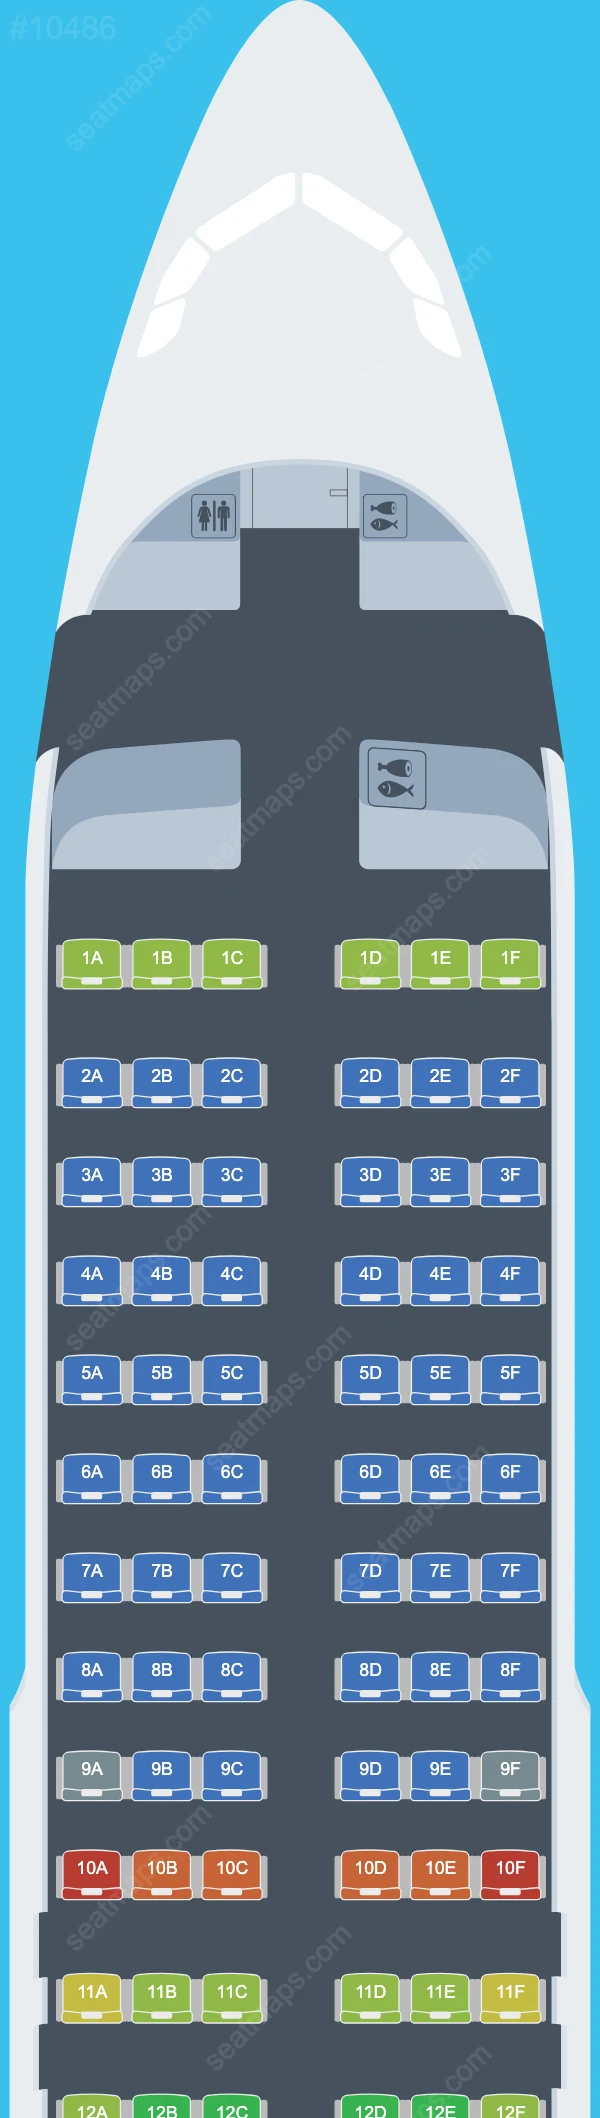 Qingdao Airlines Airbus A320-200neo seatmap preview